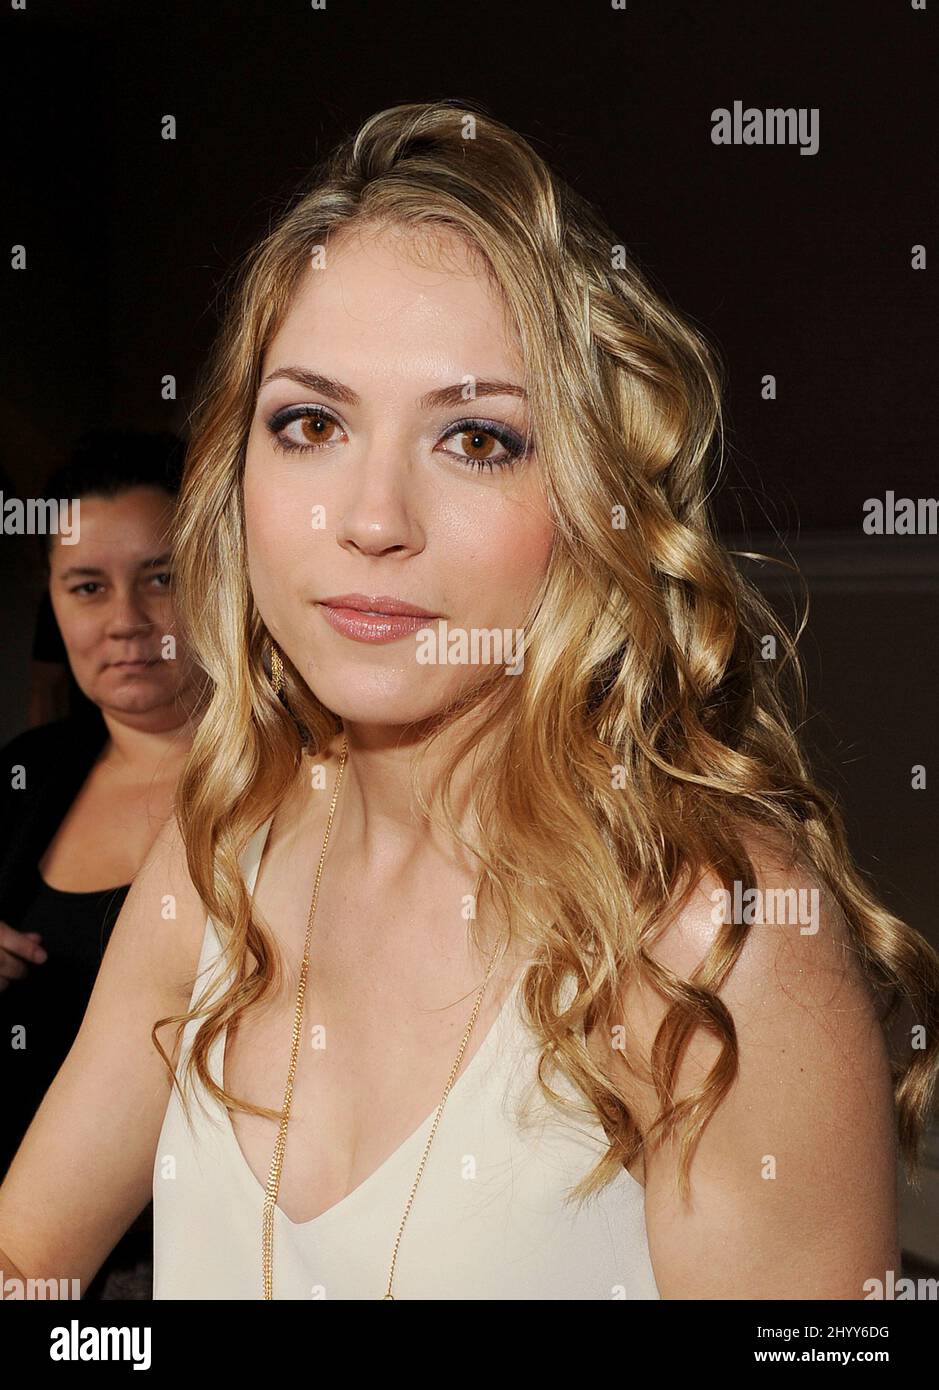 Brooke Nevin at the 2011 TCA Winter Press Tour - Day 3 - Arrivals, held ...